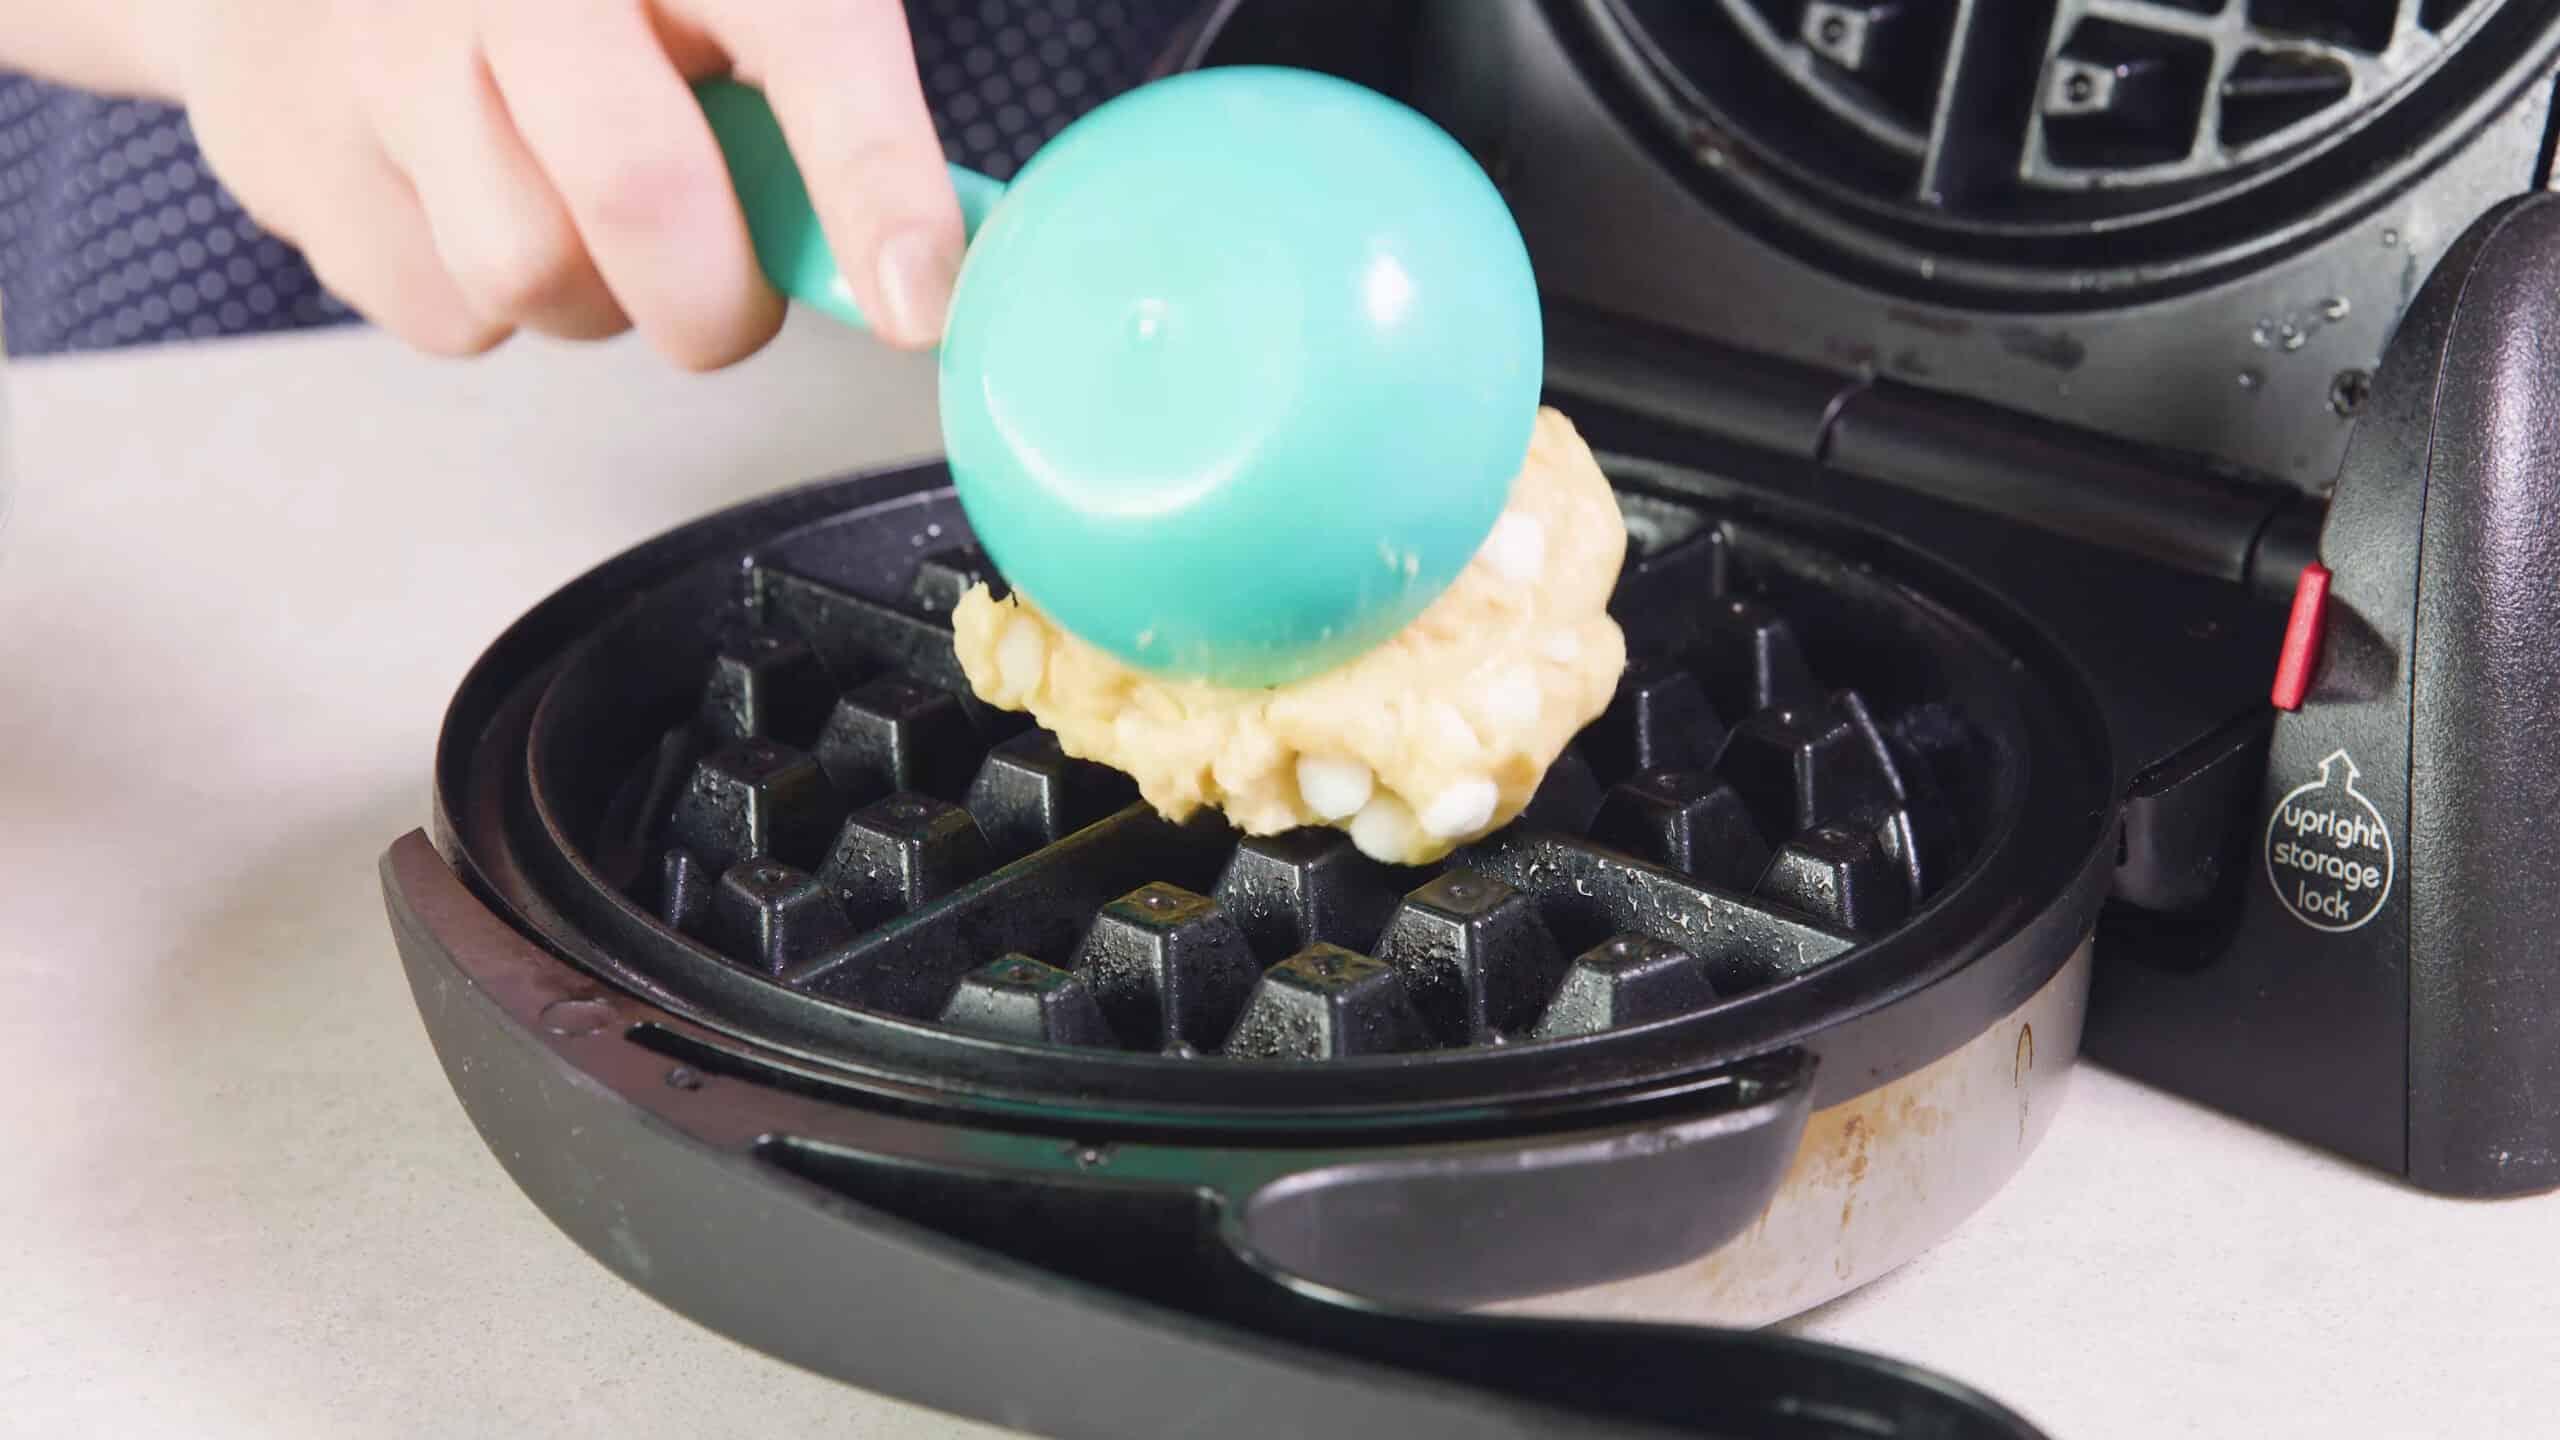 Using a one third of a cup measuring cup, portion out the batter into a greased waffle maker.